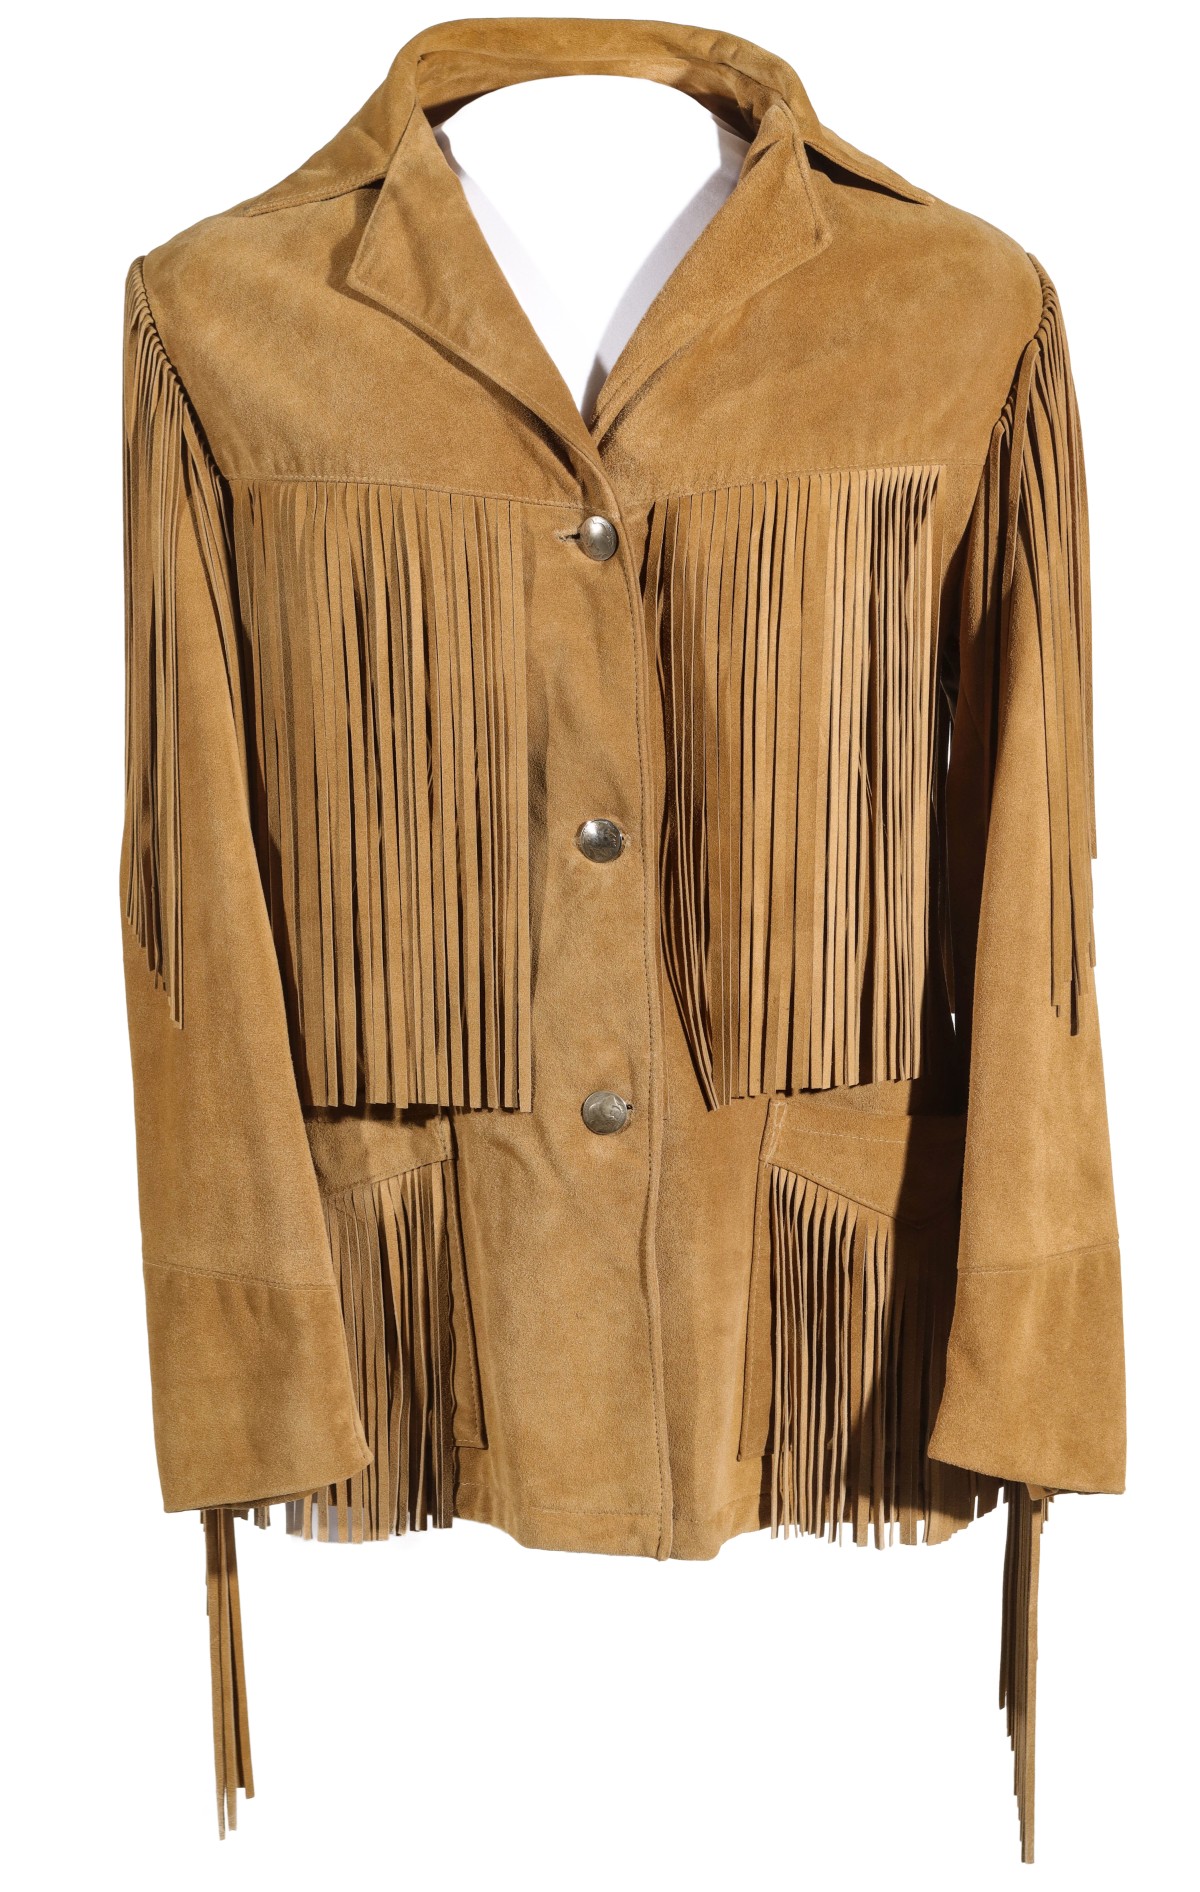 A FRINGE MEN'S JACKET WITH DOMED BUFFALO NICKEL BUTTONS